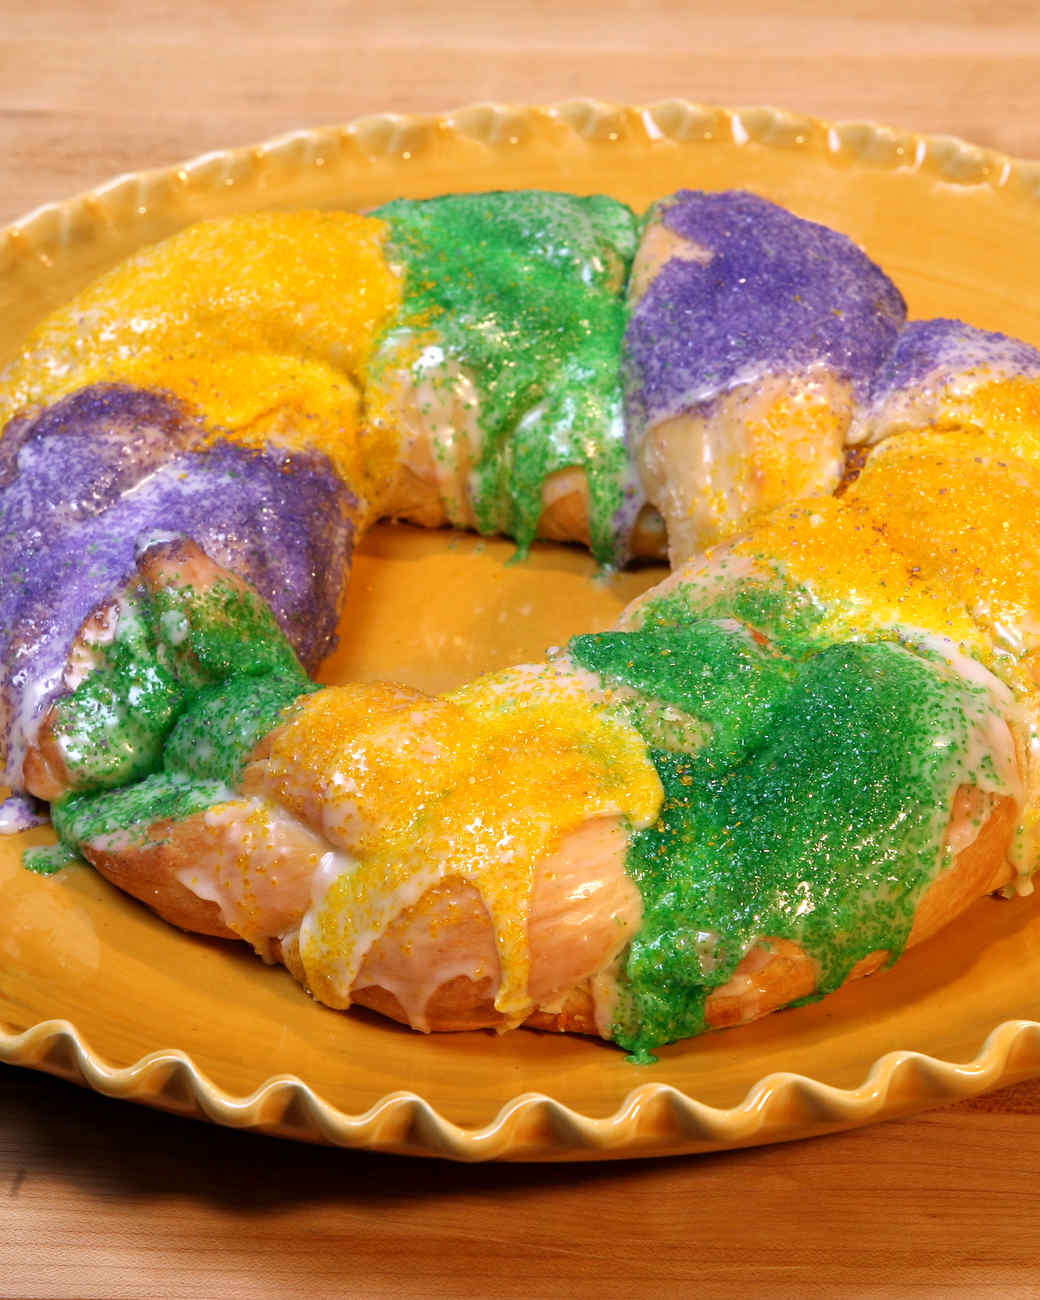 Desserts For Mardi Gras
 12 Decadent Desserts to Help You Party Like It s Mardi